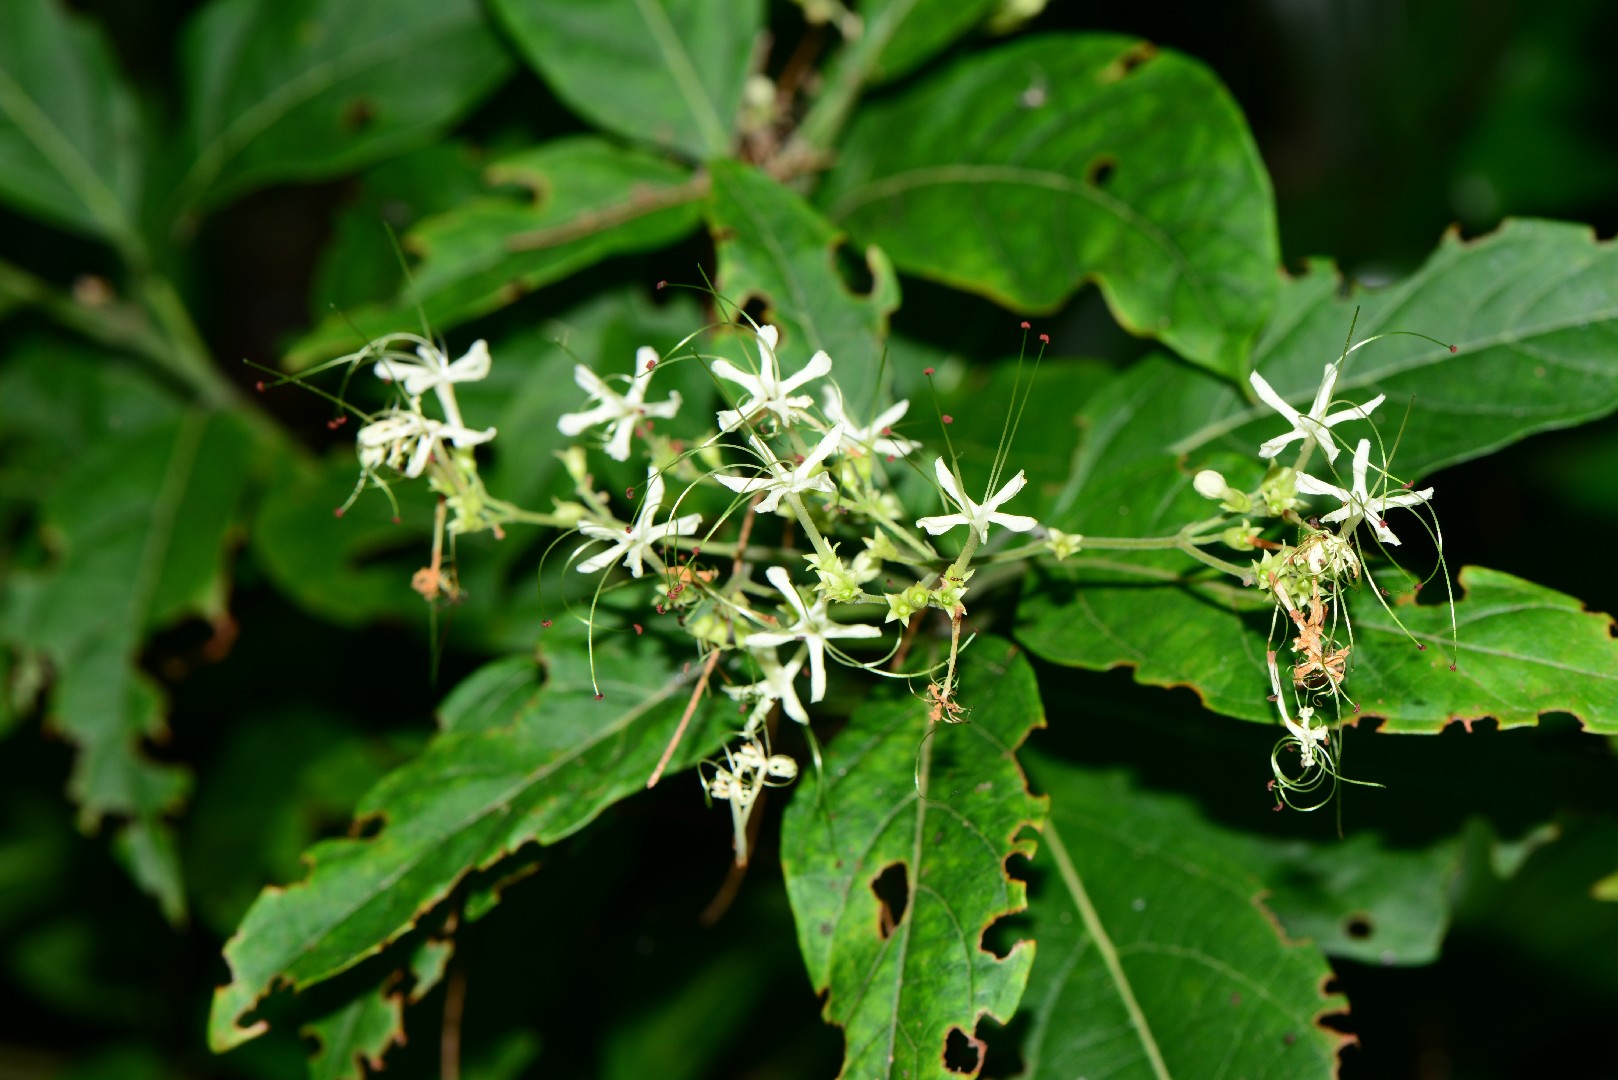 Clerodendrum (Clerodendrum)